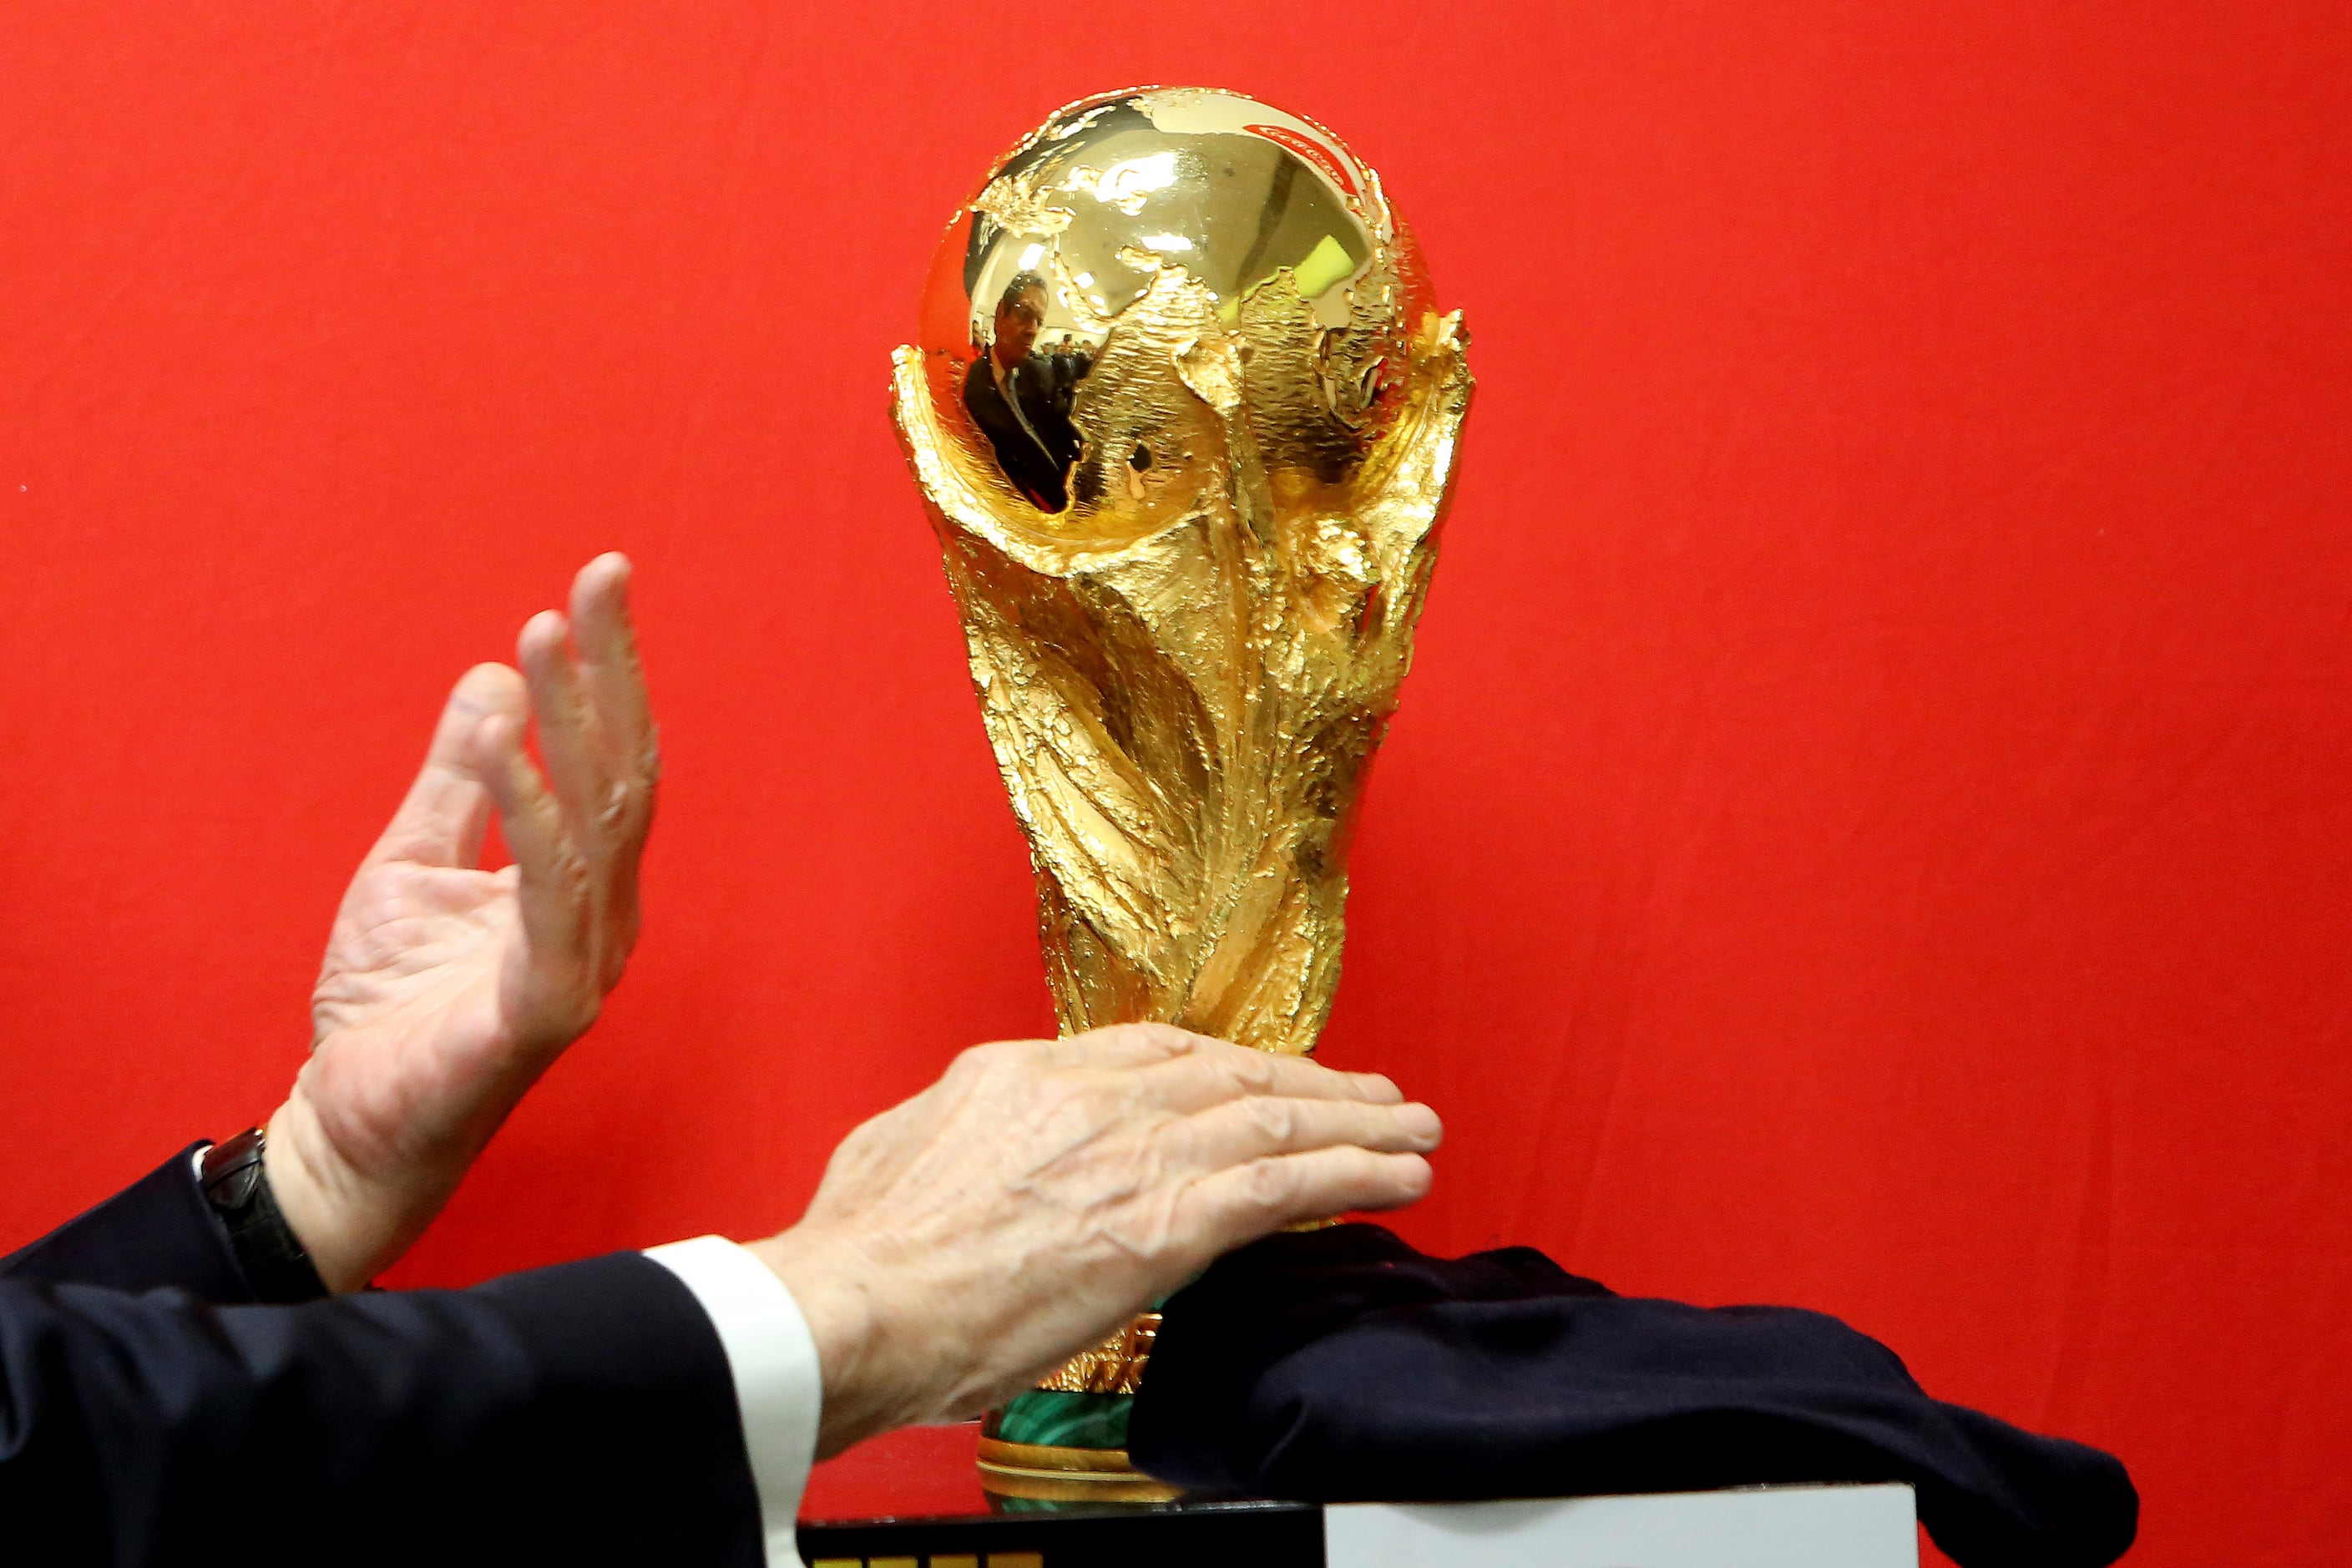 FIFA unveils host cities for 2026 World Cup: Travel Weekly